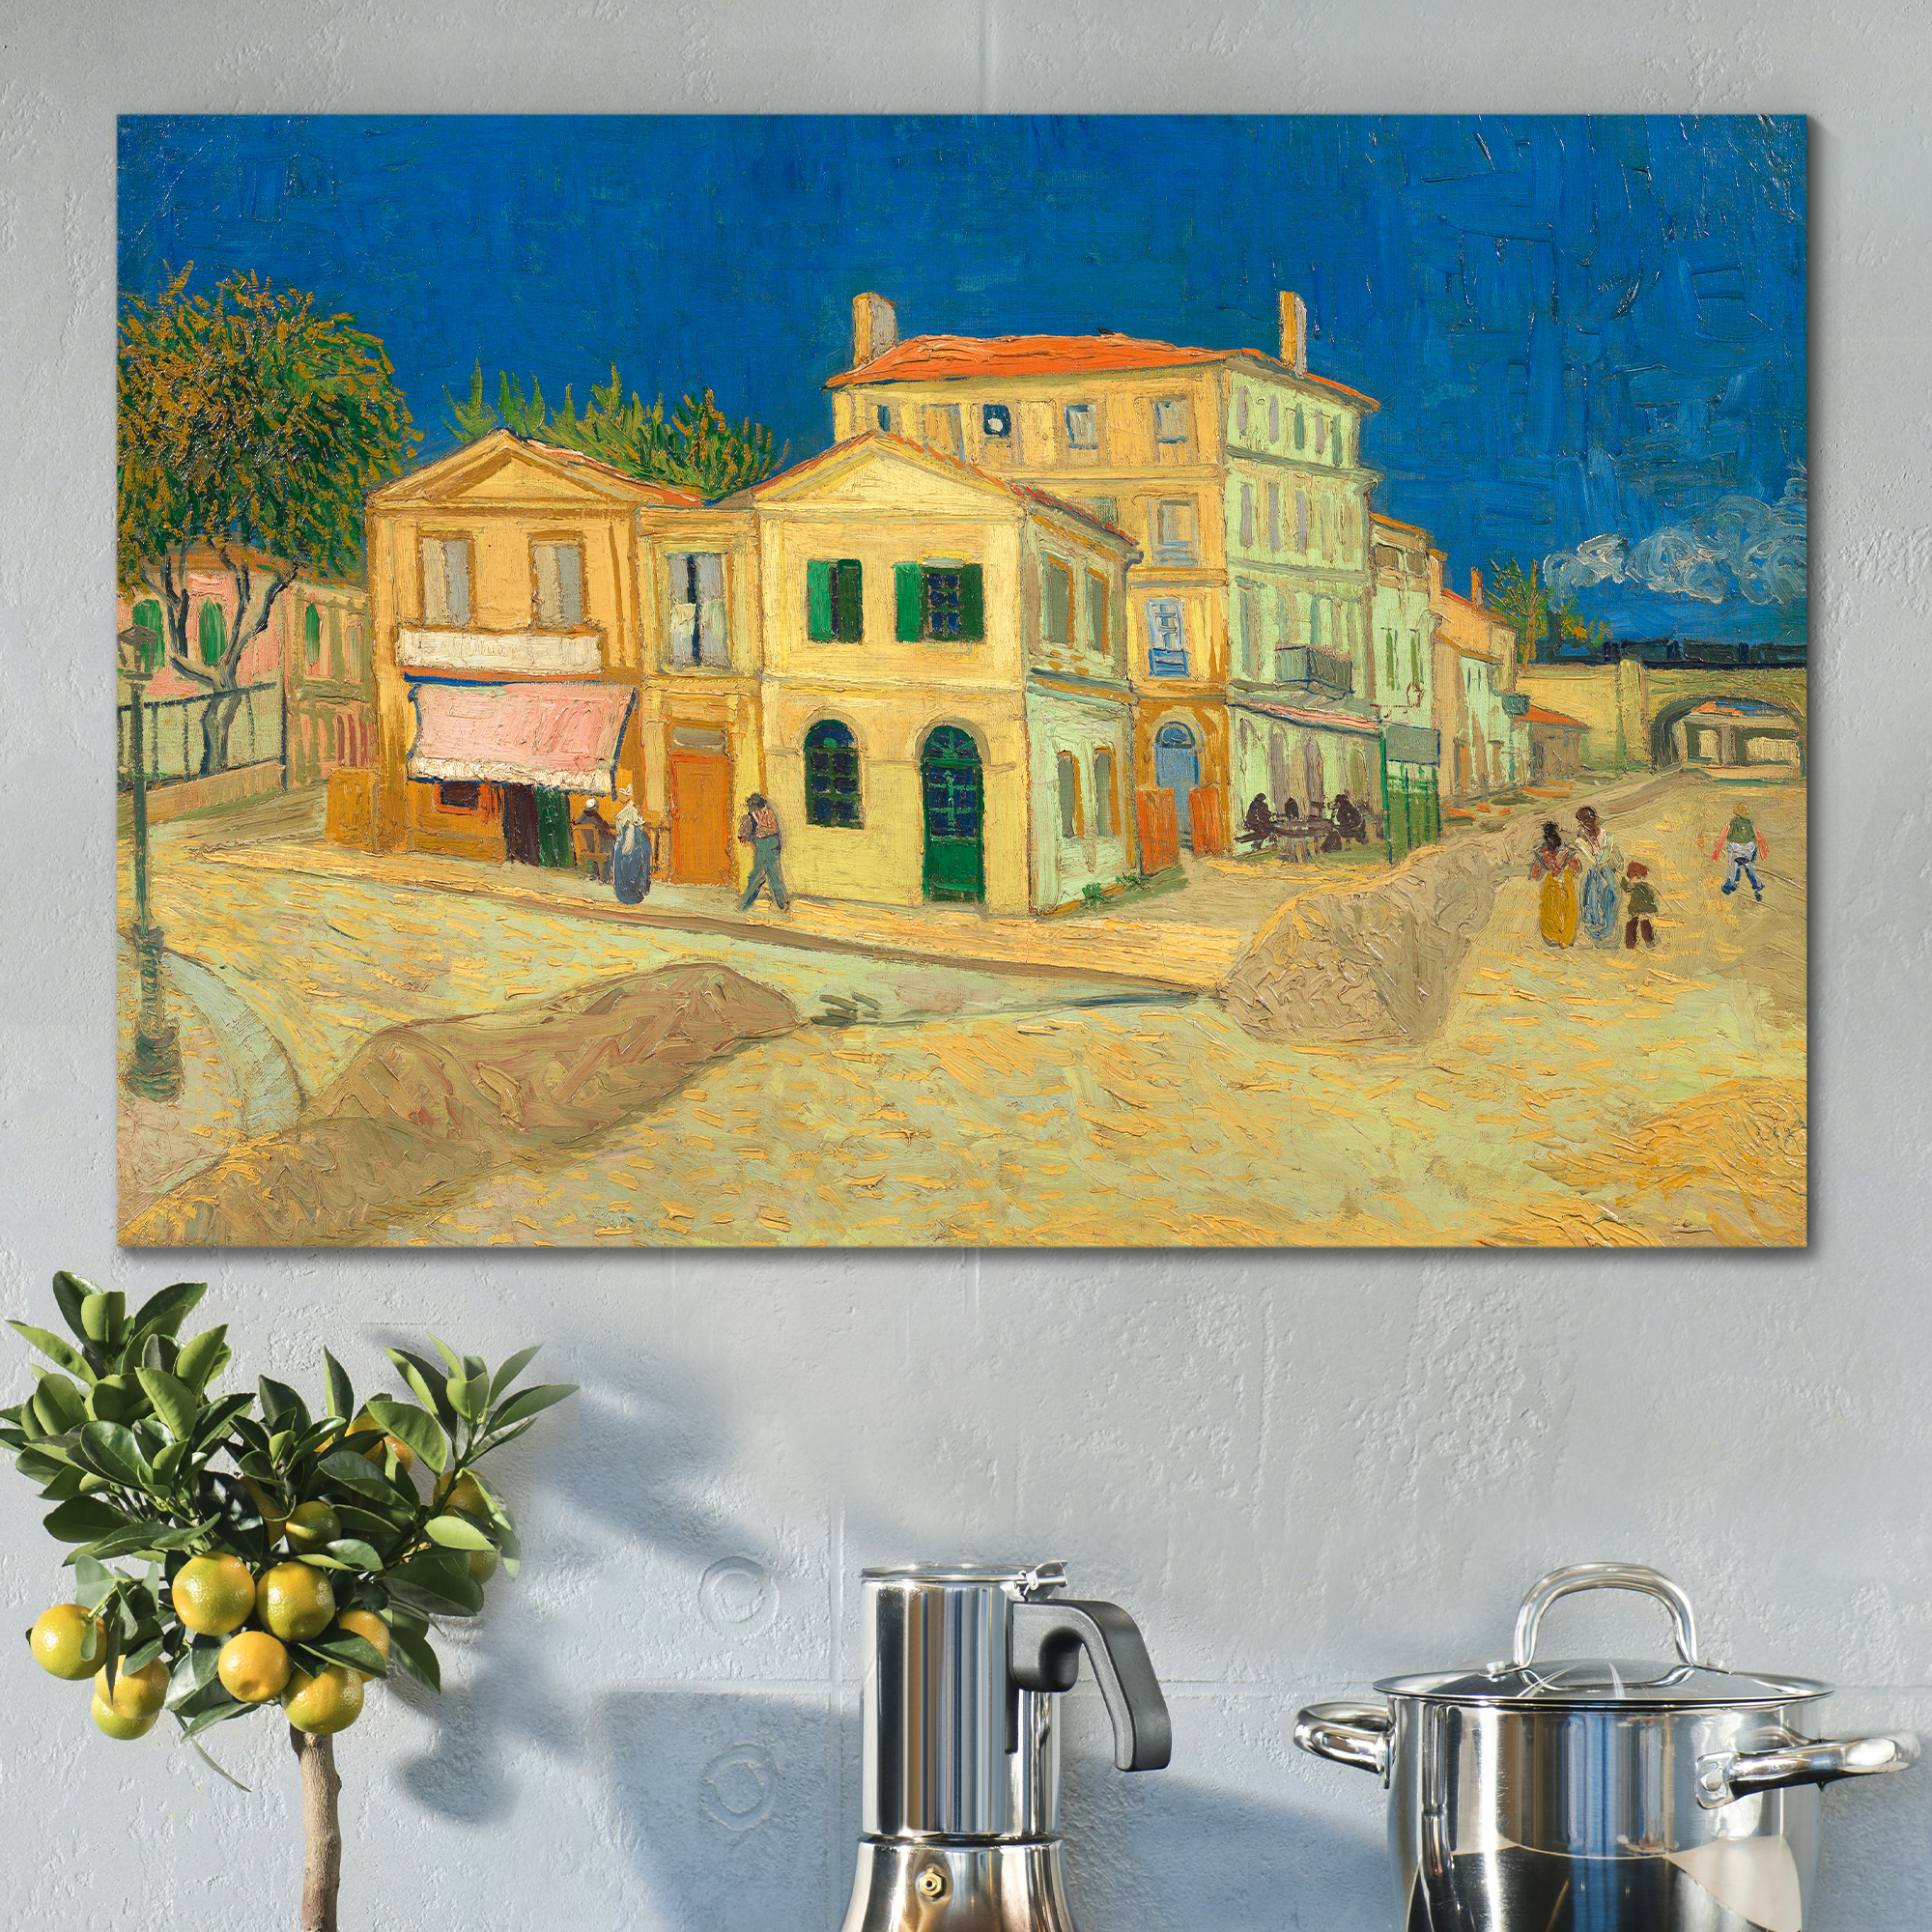 The Yellow House by Vincent Van Gogh - Oil Painting Reproduction on Canvas Prints Wall Art, Ready to Hang - 24